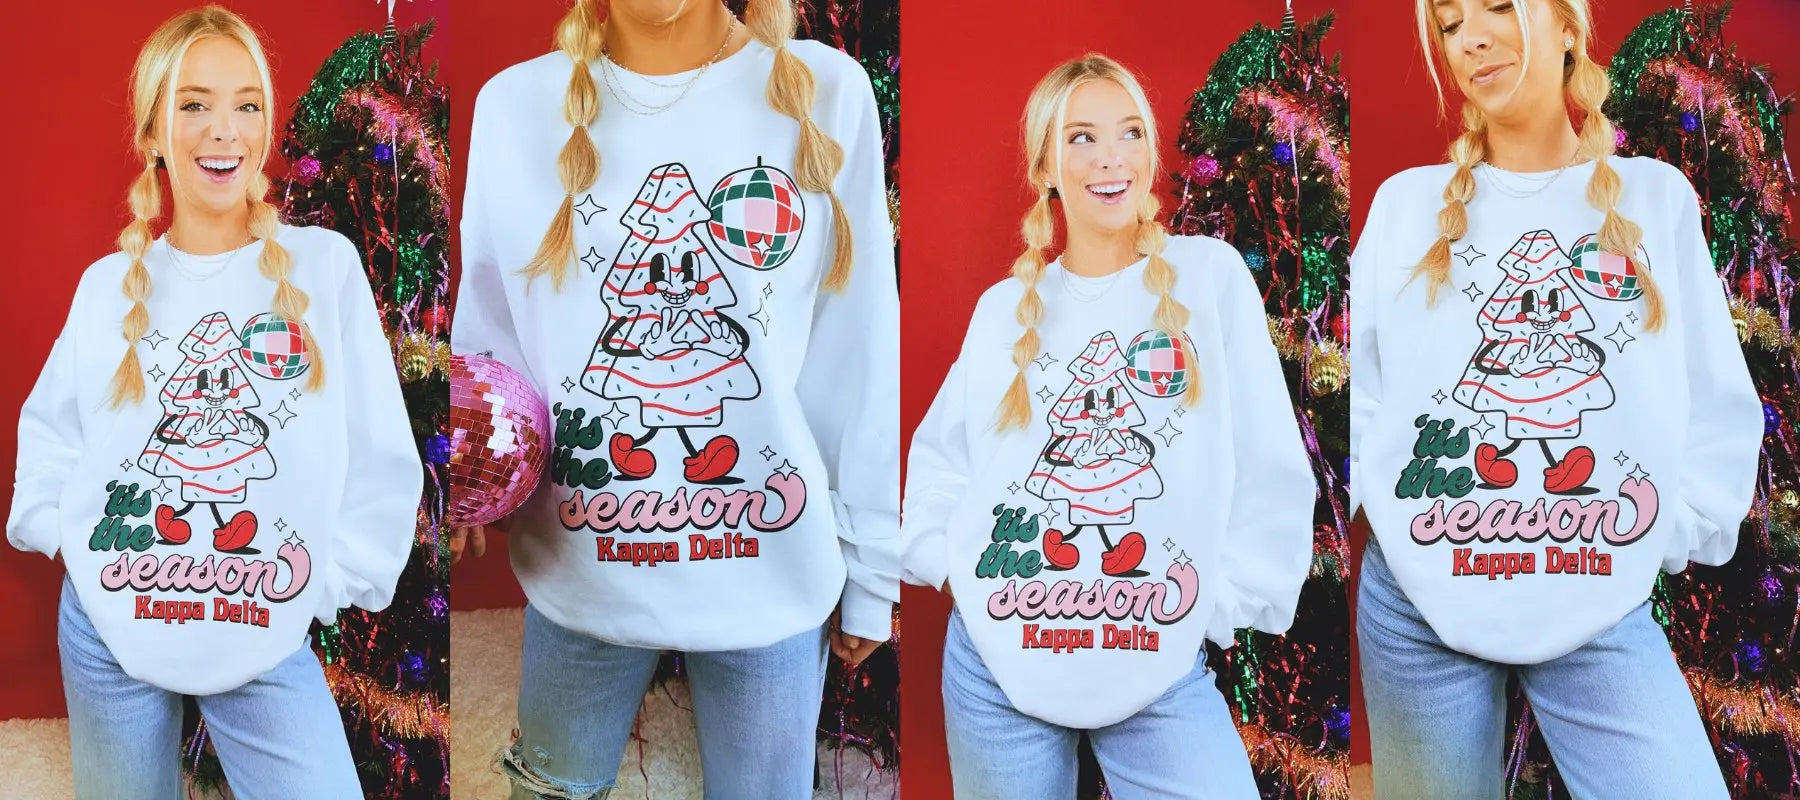 Girl wears a white Christmas sweater